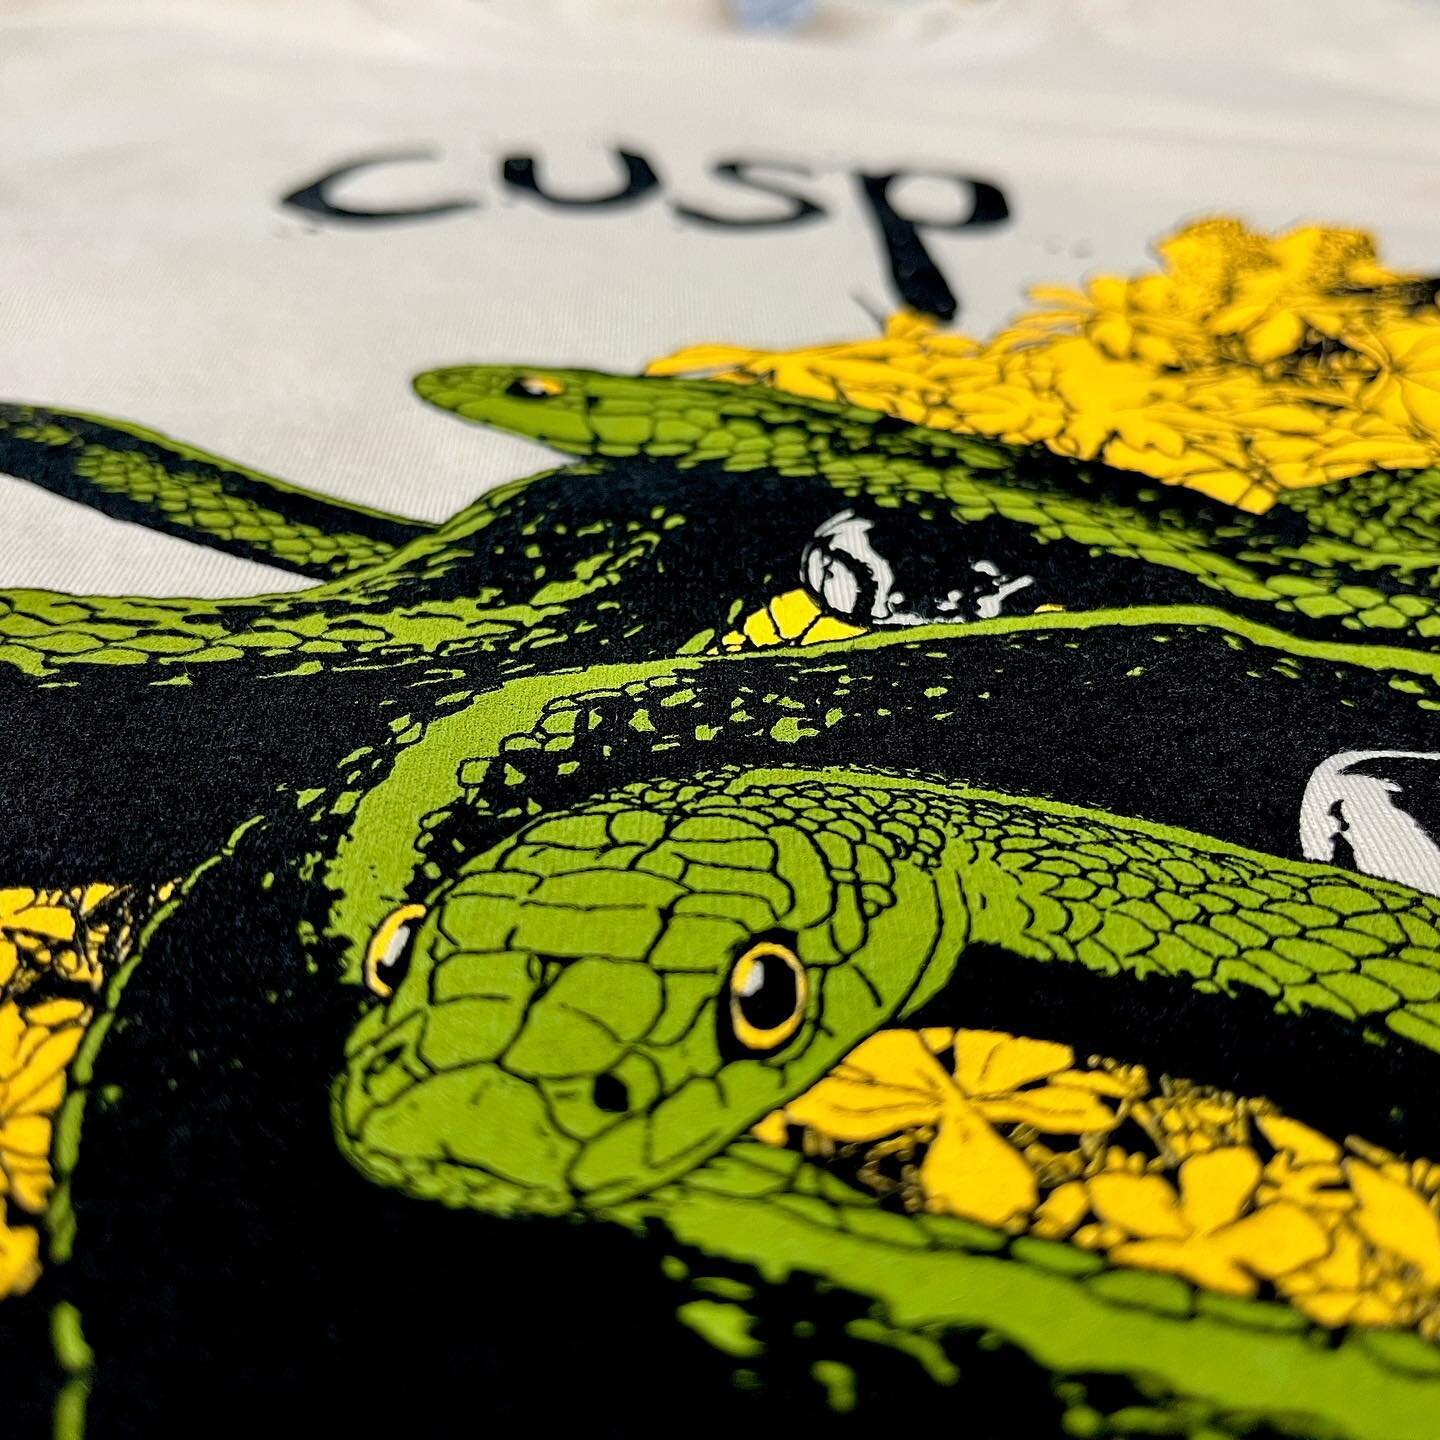 3 color prints of 3 curious snake buddies for @cusptunes on Soft Cream  @nextlevel.apparel tees!Thanksssssss Cusssssssp🐍
💥🏠💥

#explodinghouseprinting #cusp #cuspband #pantone #snake #chicagoscreenprinting #nextlevel #chicago #chicagoprinters #chi